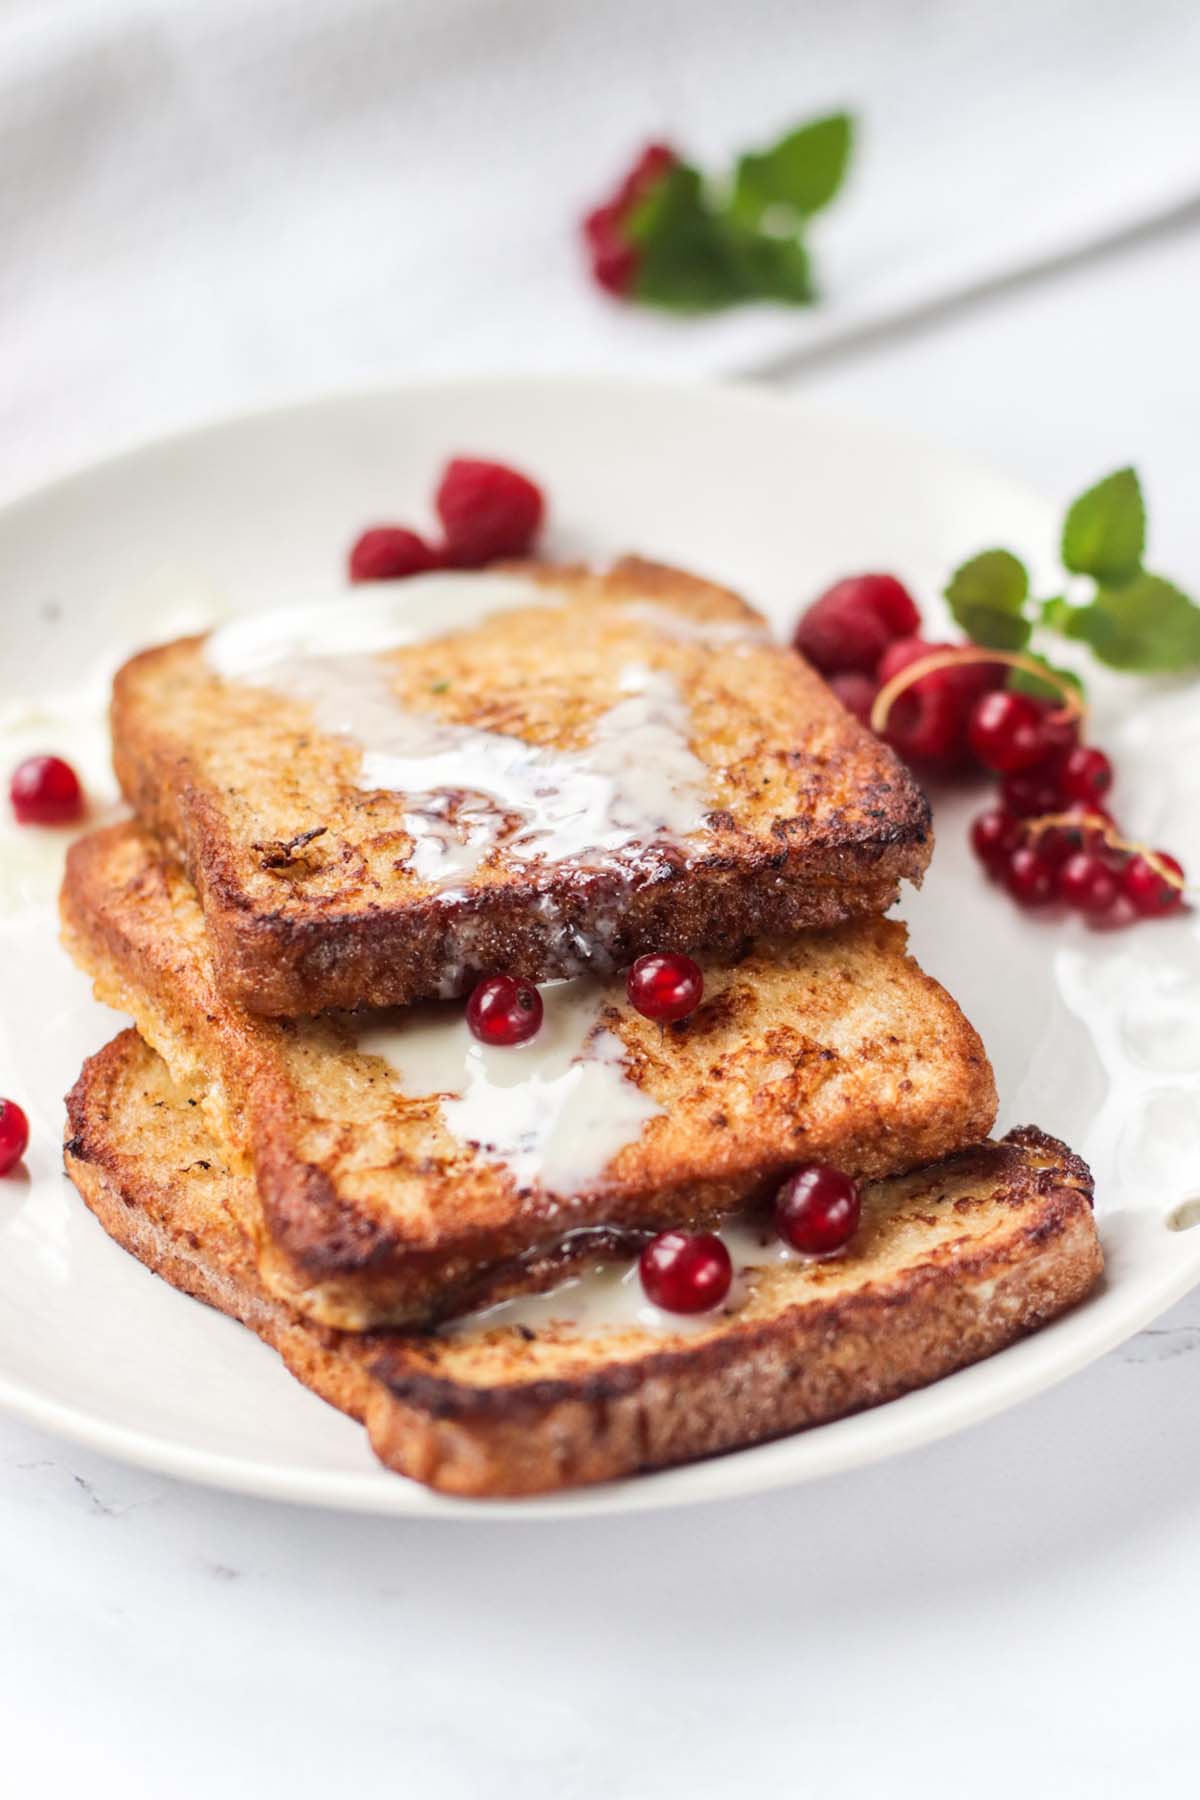 French toast on a plate with berries and drizzled with a white sauce.